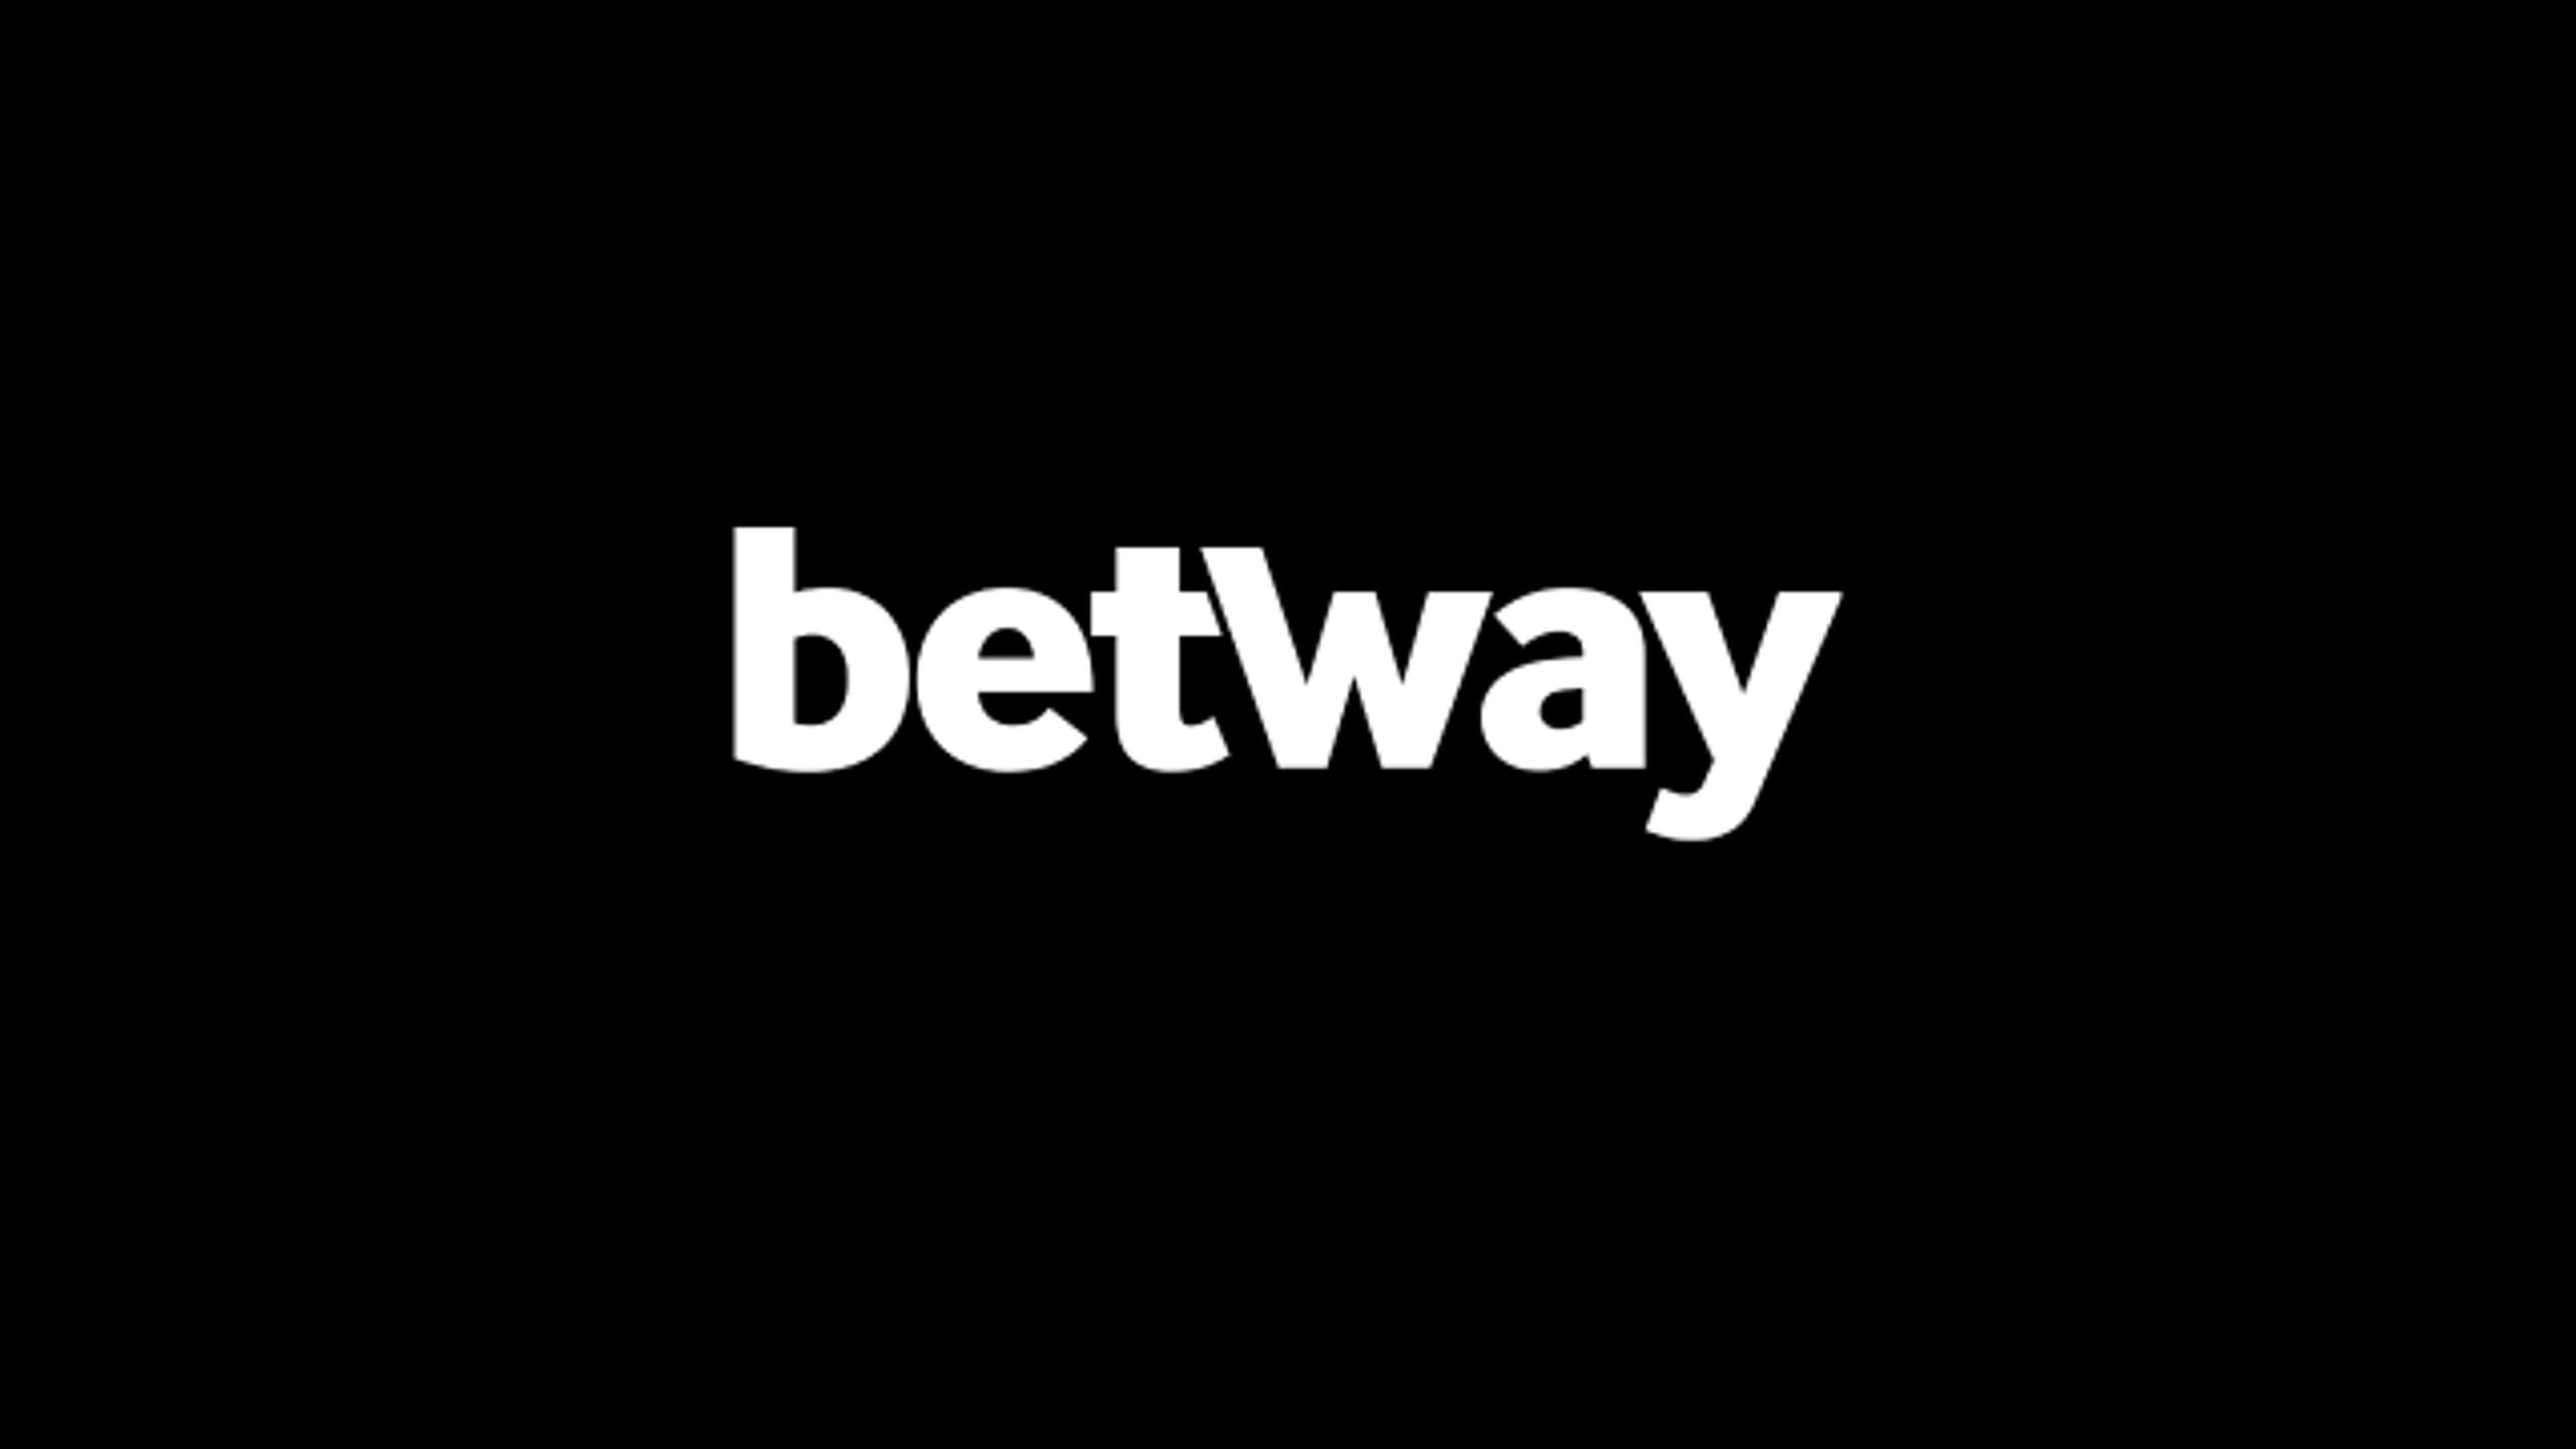 How to Place a Win or Draw Bet on Betway: Guide to Win or Draw Bet